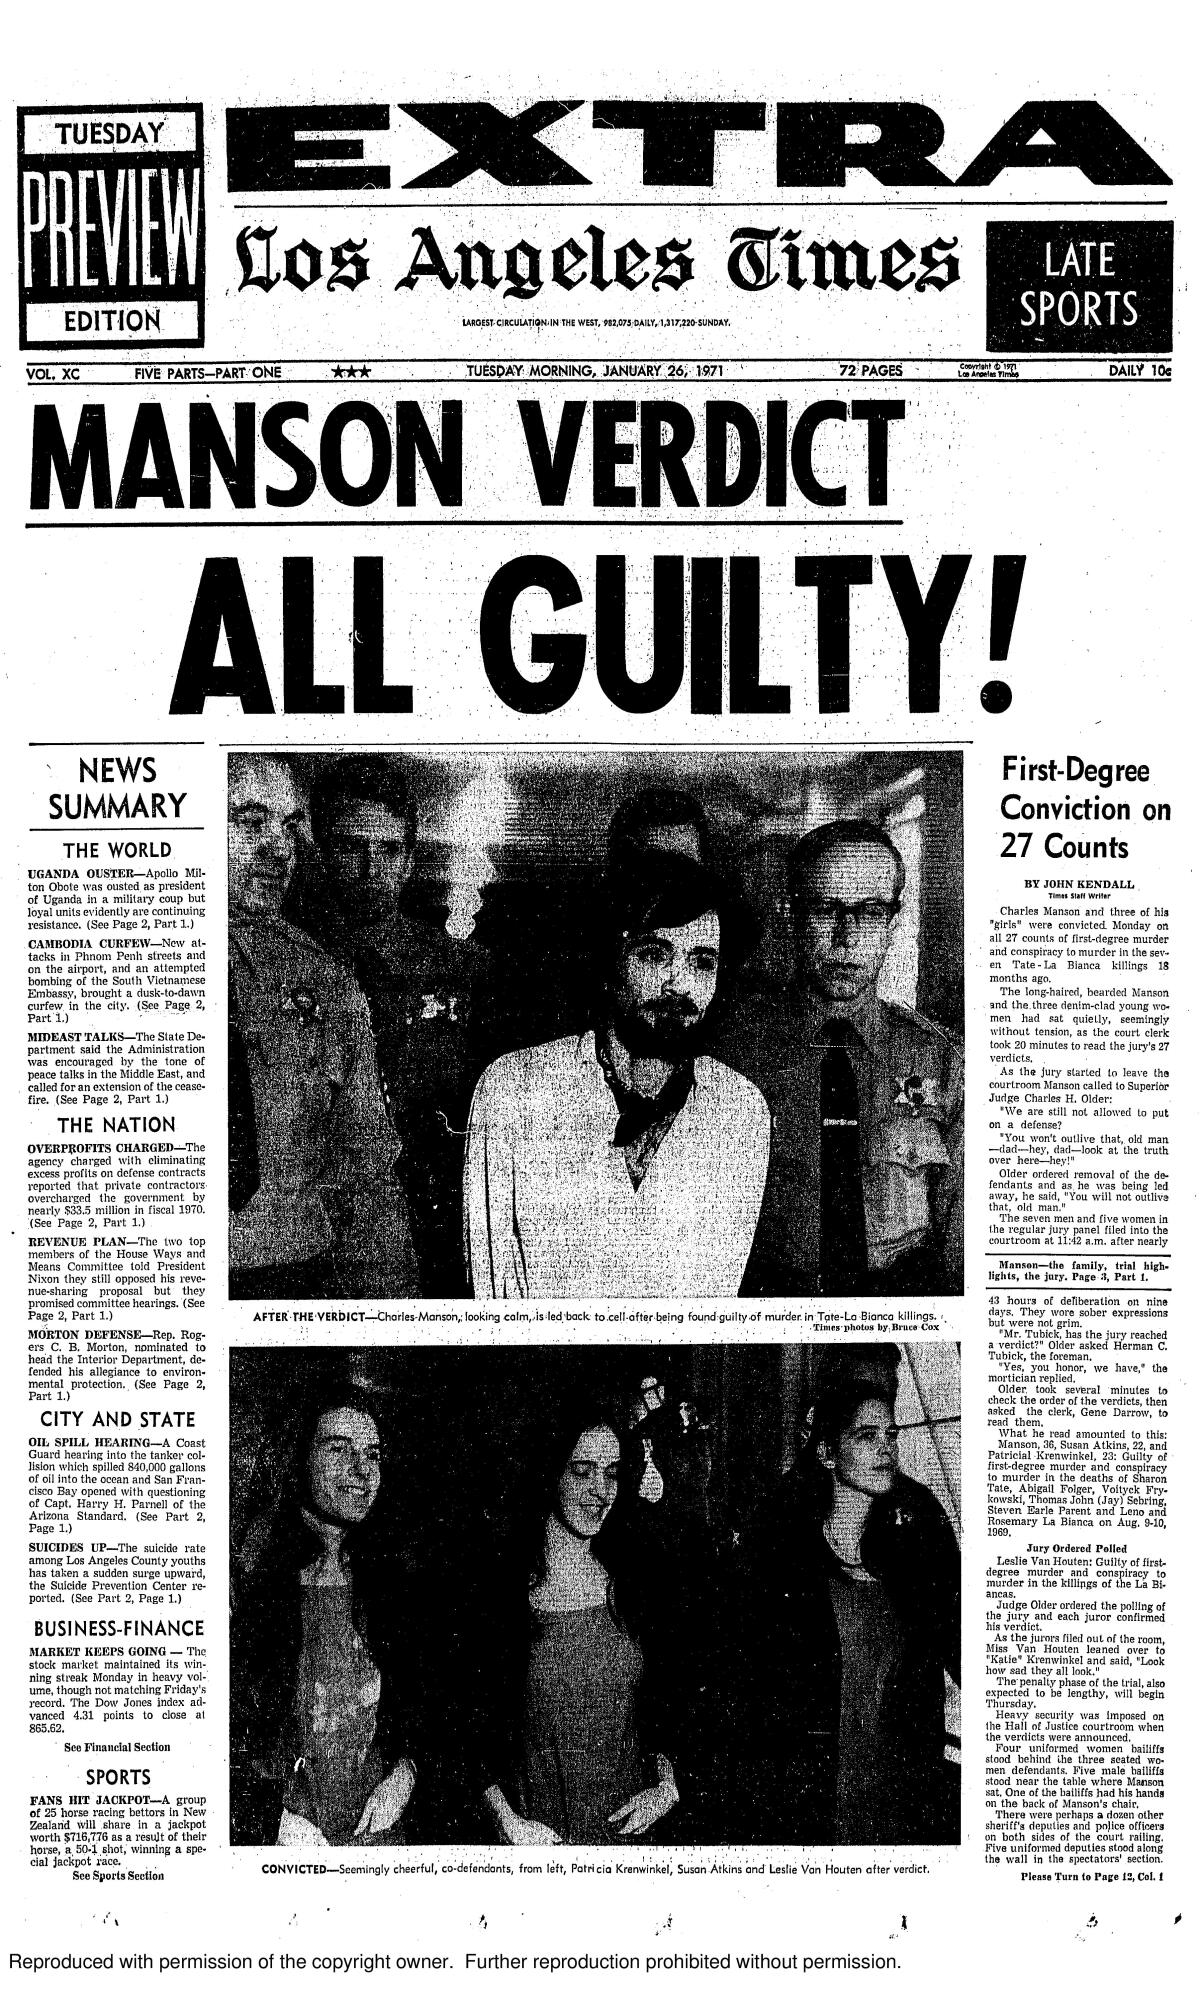 The front page of the Los Angeles Times on Jan. 26, 1971